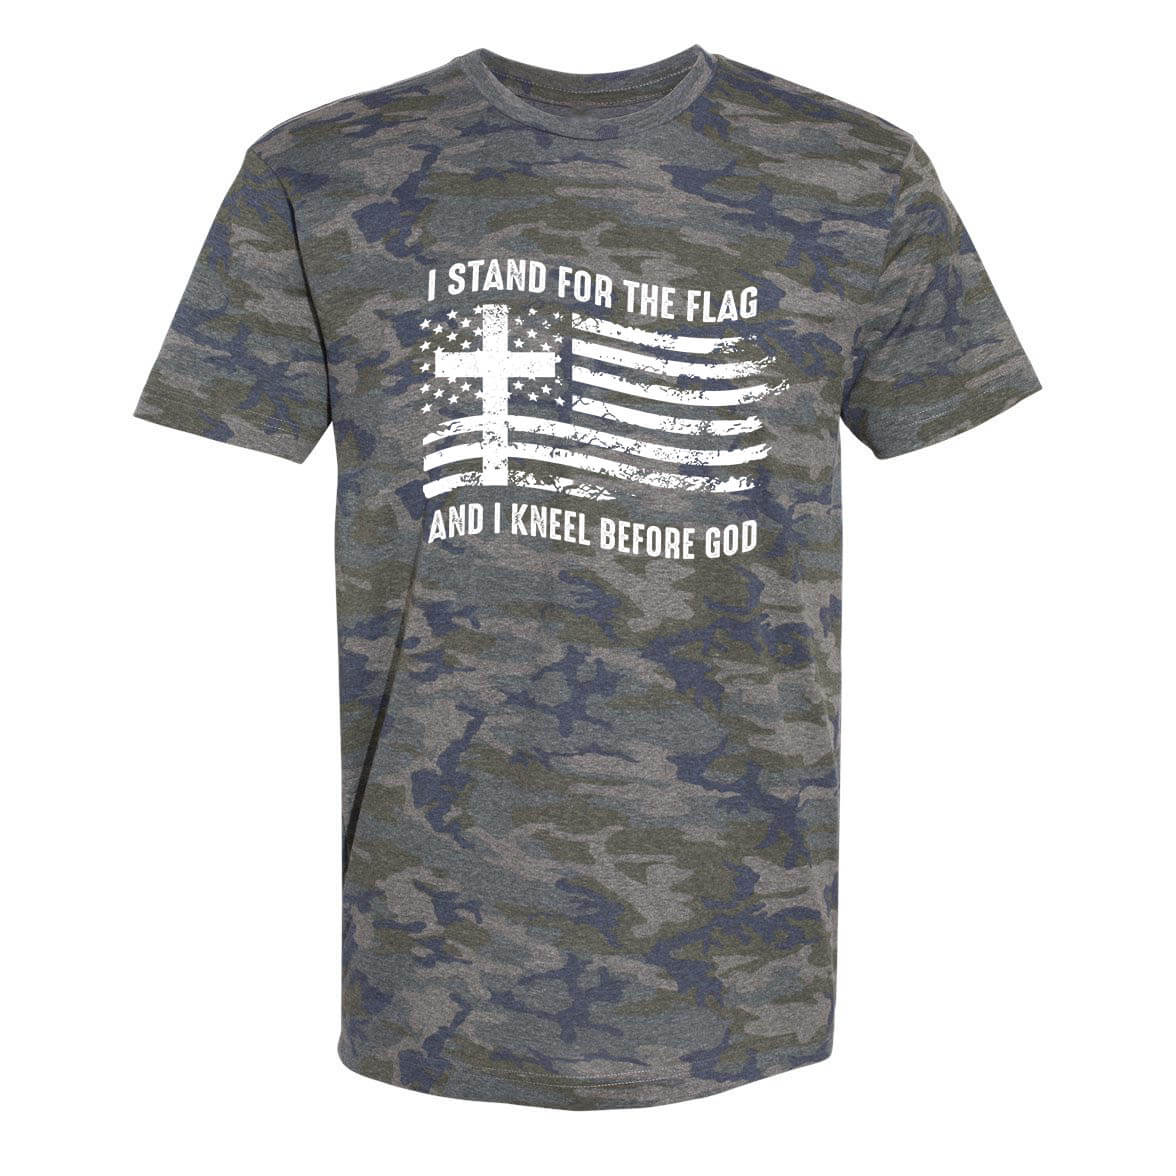 I Stand For The Flag And I Kneel Before God Men's Camo T-Shirt